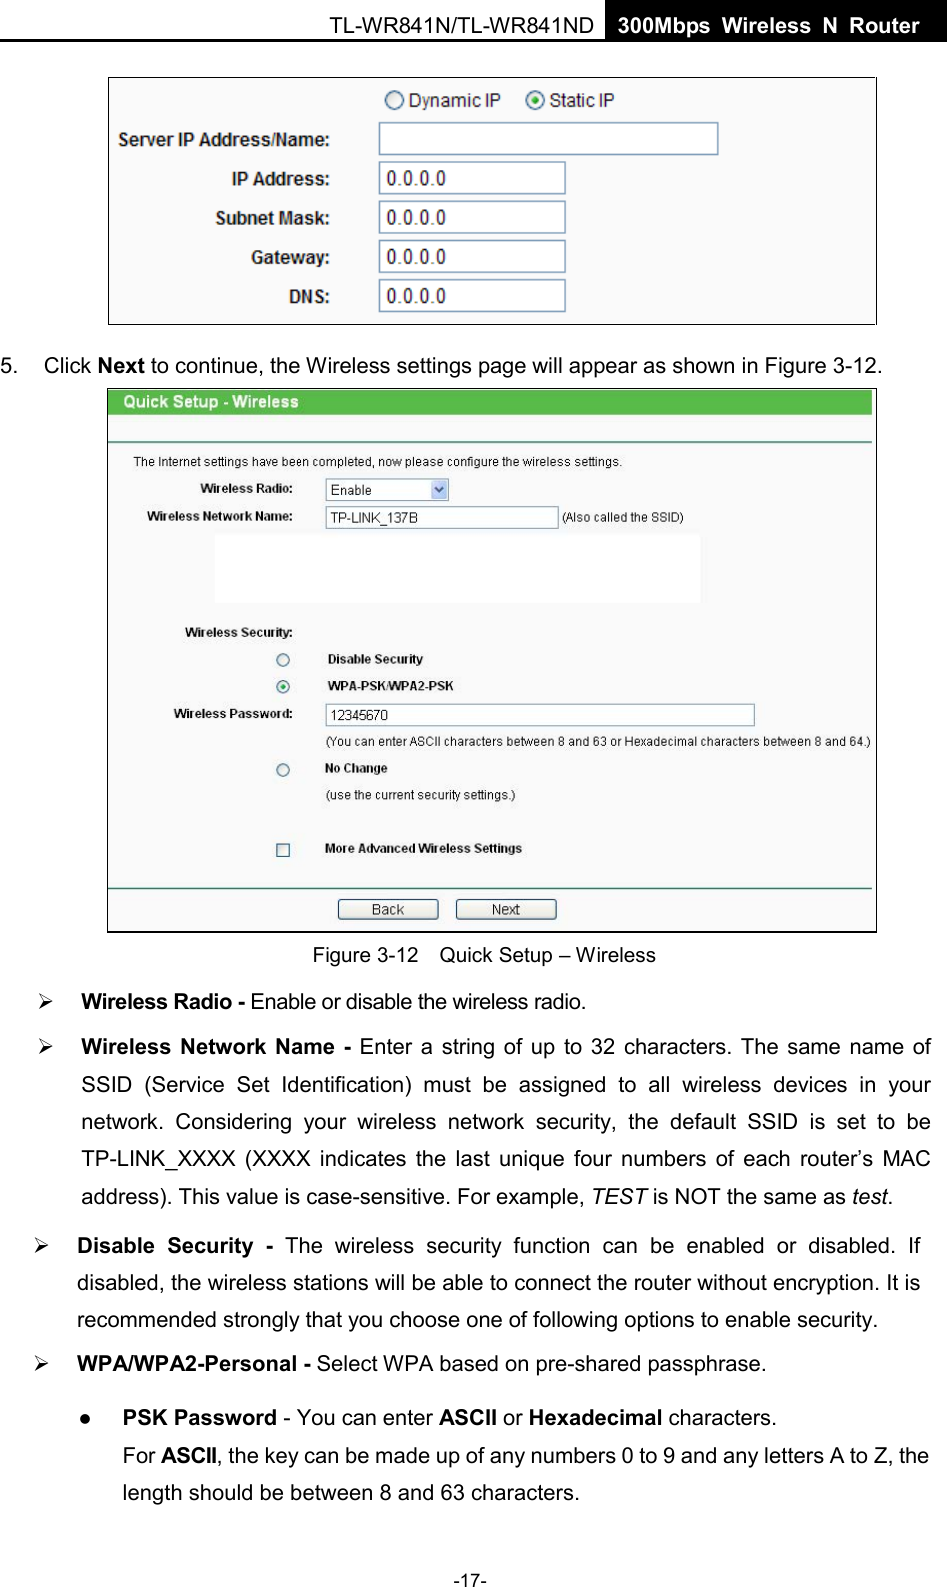 TL-WR841N/TL-WR841ND  300Mbps Wireless N Router 5. Click Next to continue, the Wireless settings page will appear as shown in Figure 3-12.Figure 3-12  Quick Setup – Wireless Wireless Radio - Enable or disable the wireless radio.Wireless Network Name - Enter a string of up to 32 characters. The same name ofSSID  (Service Set Identification)  must be assigned to all wireless devices in yournetwork.  Considering your wireless  network security, the default SSID is set to beTP-LINK_XXXX  (XXXX indicates the last unique four numbers of each router’s MACaddress). This value is case-sensitive. For example, TEST is NOT the same as test.-17- Disable Security  - The wireless security function can be enabled or disabled. Ifdisabled, the wireless stations will be able to connect the router without encryption. It isrecommended strongly that you choose one of following options to enable security.WPA/WPA2-Personal - Select WPA based on pre-shared passphrase.PSK Password - You can enter ASCII or Hexadecimal characters.For ASCII, the key can be made up of any numbers 0 to 9 and any letters A to Z, thelength should be between 8 and 63 characters.